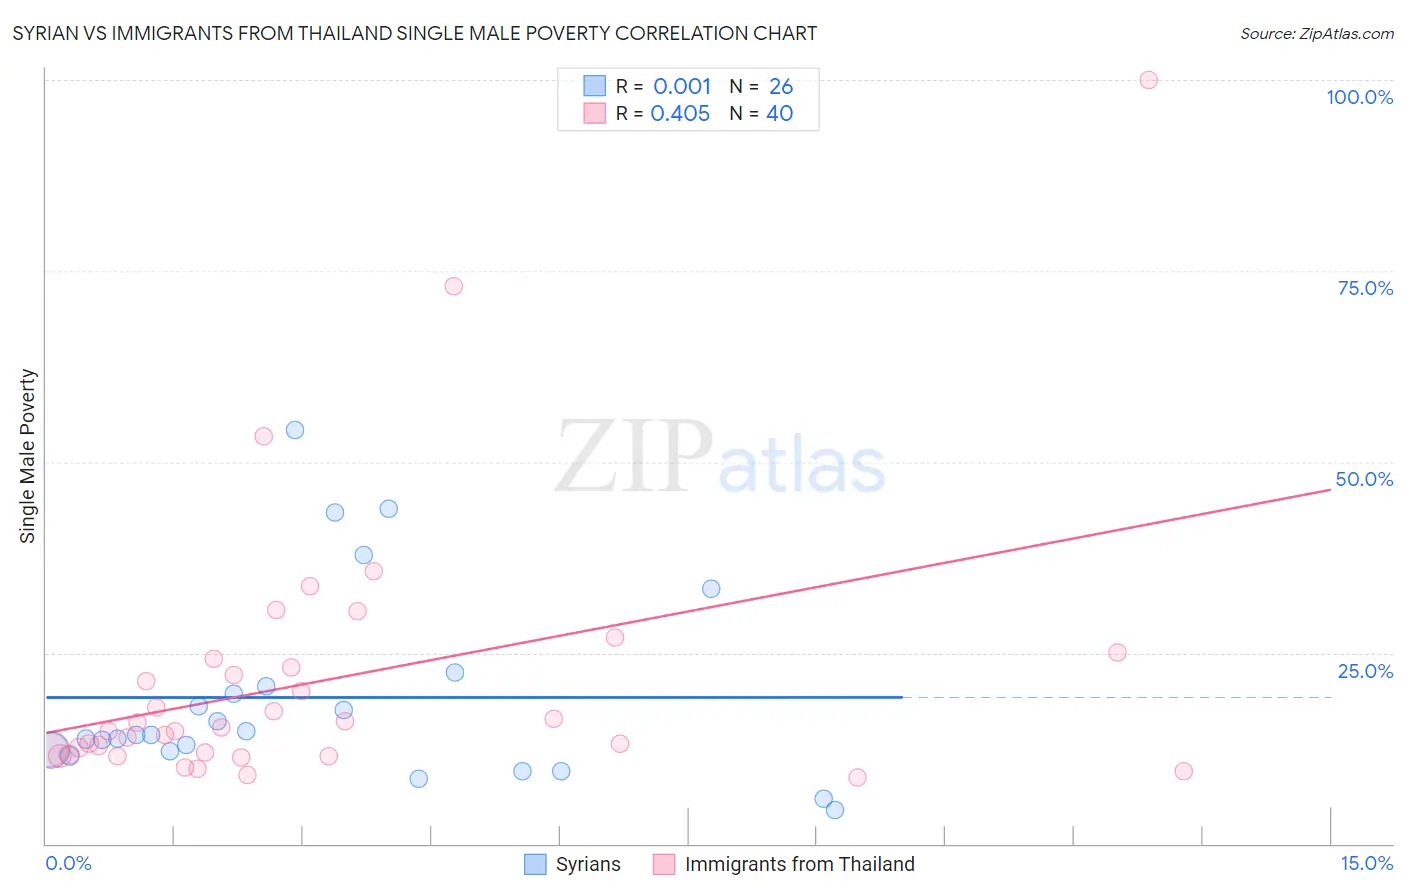 Syrian vs Immigrants from Thailand Single Male Poverty